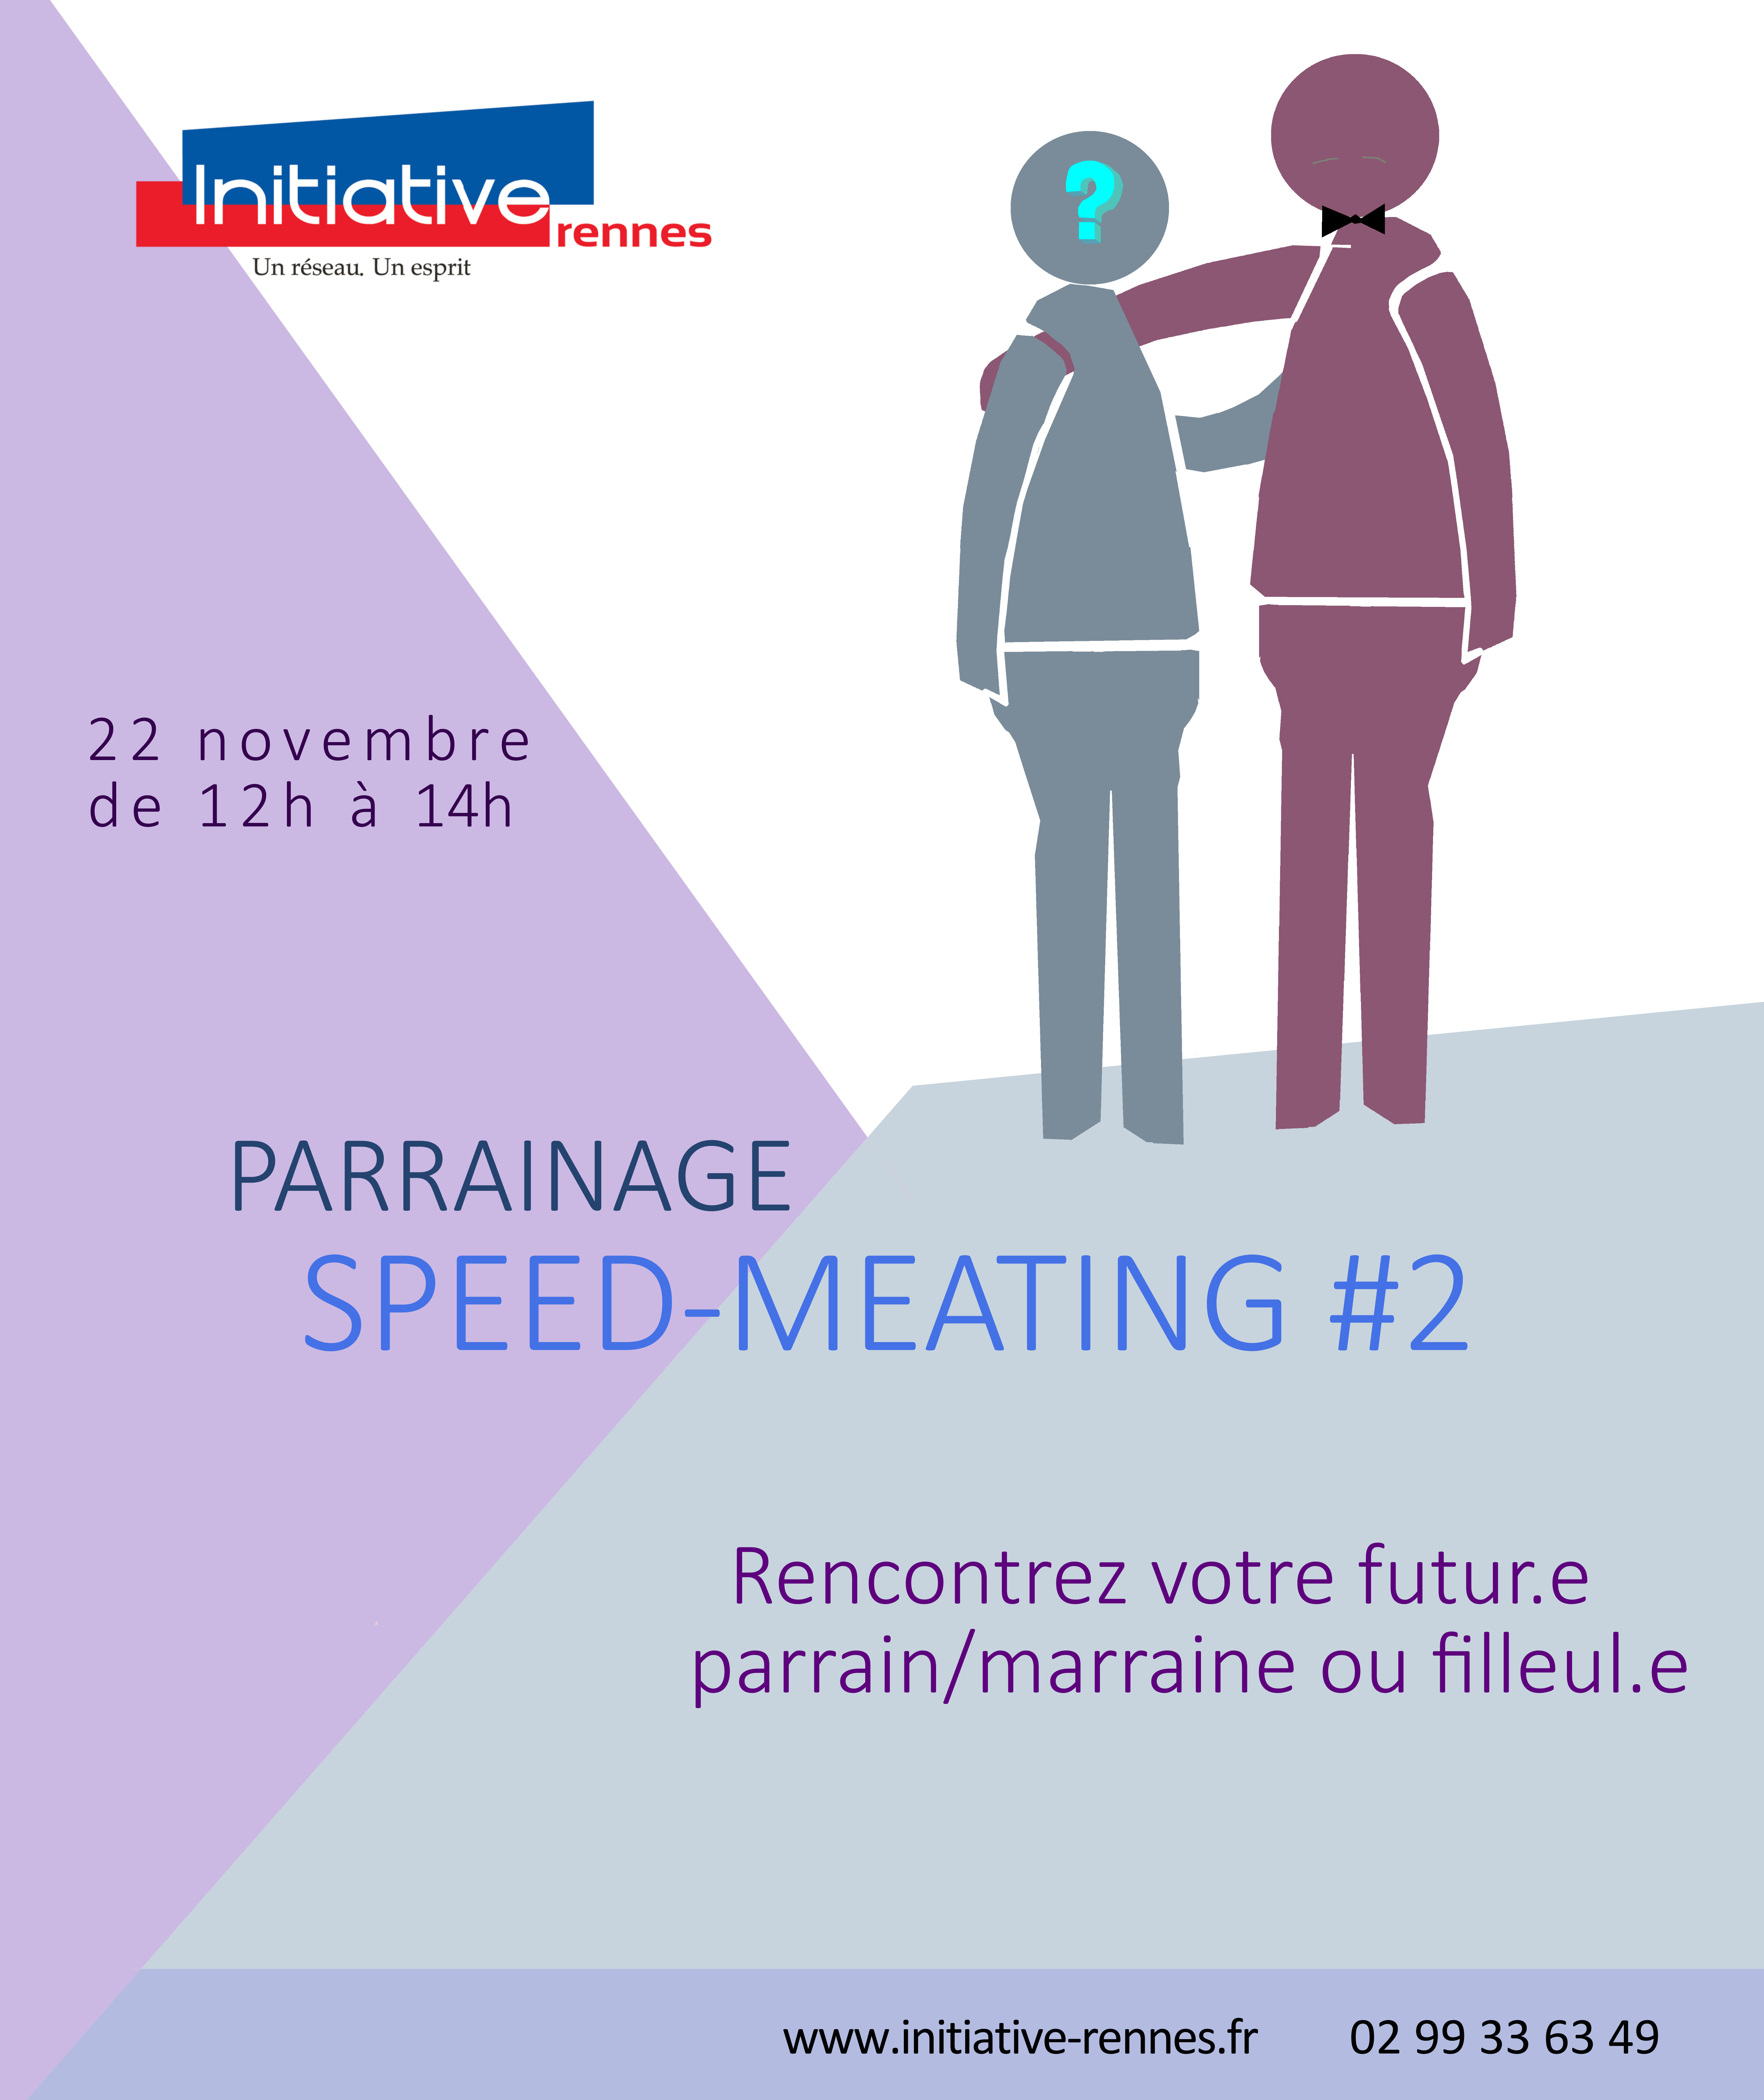 S'inscrire au speed-meating parrainage